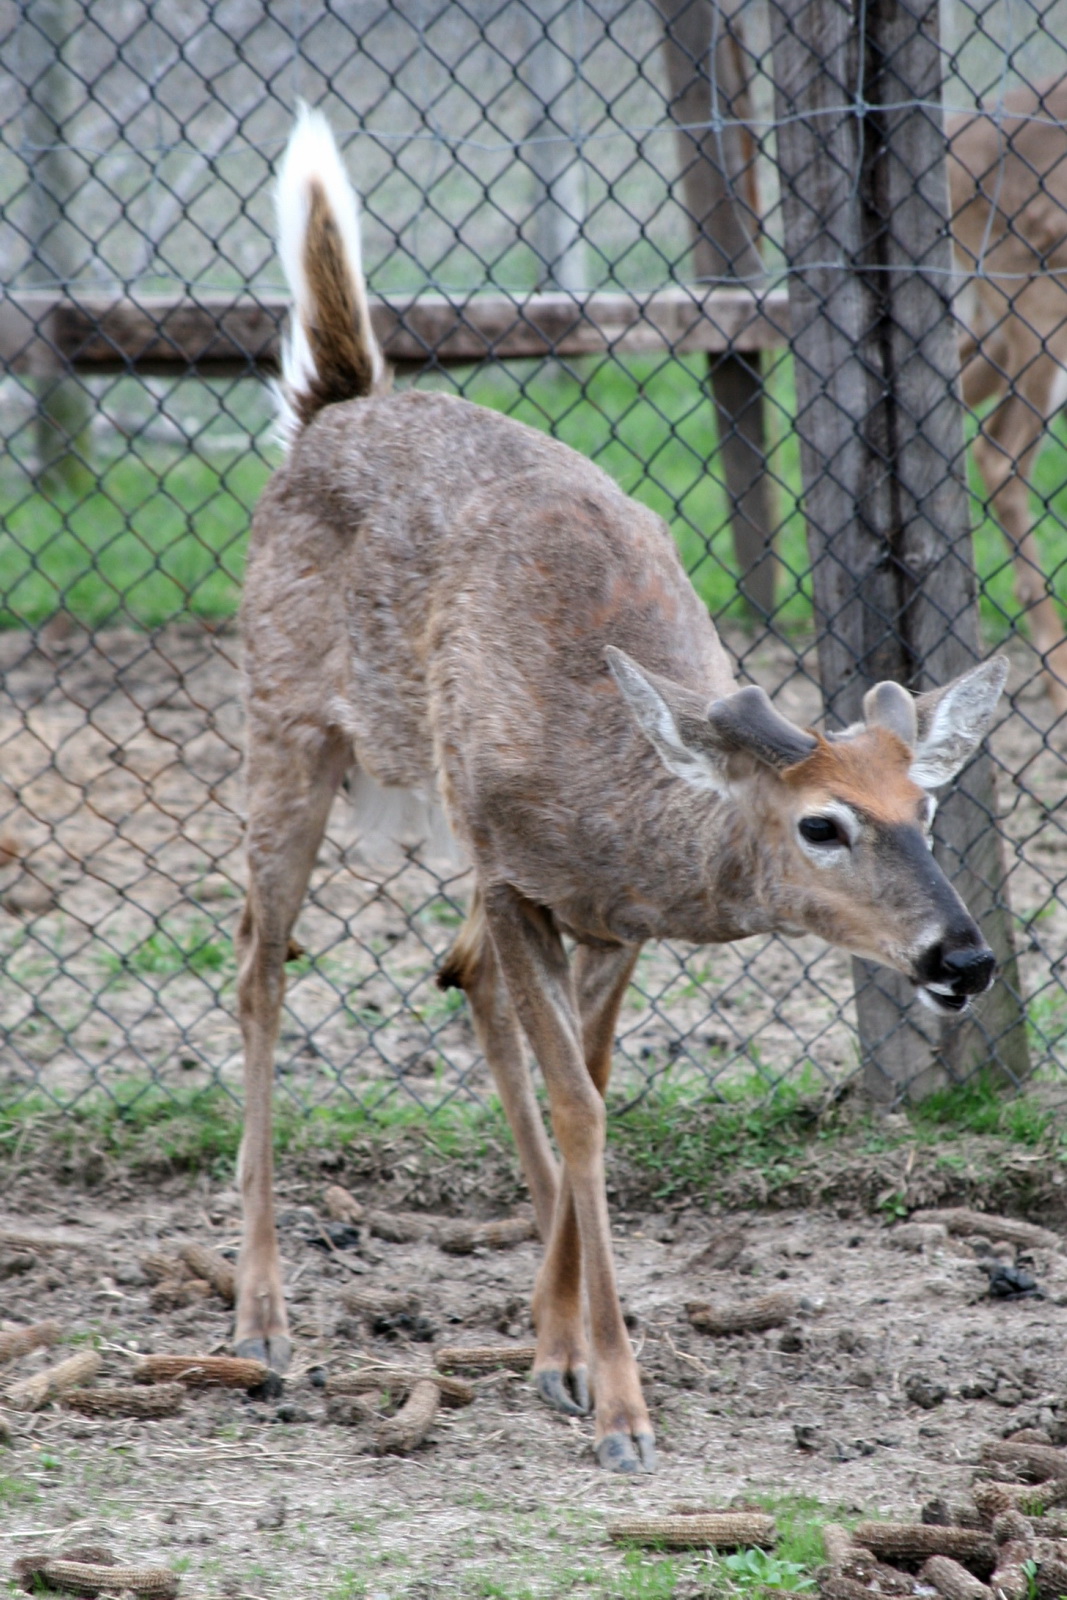 a baby deer standing next to a wire fence